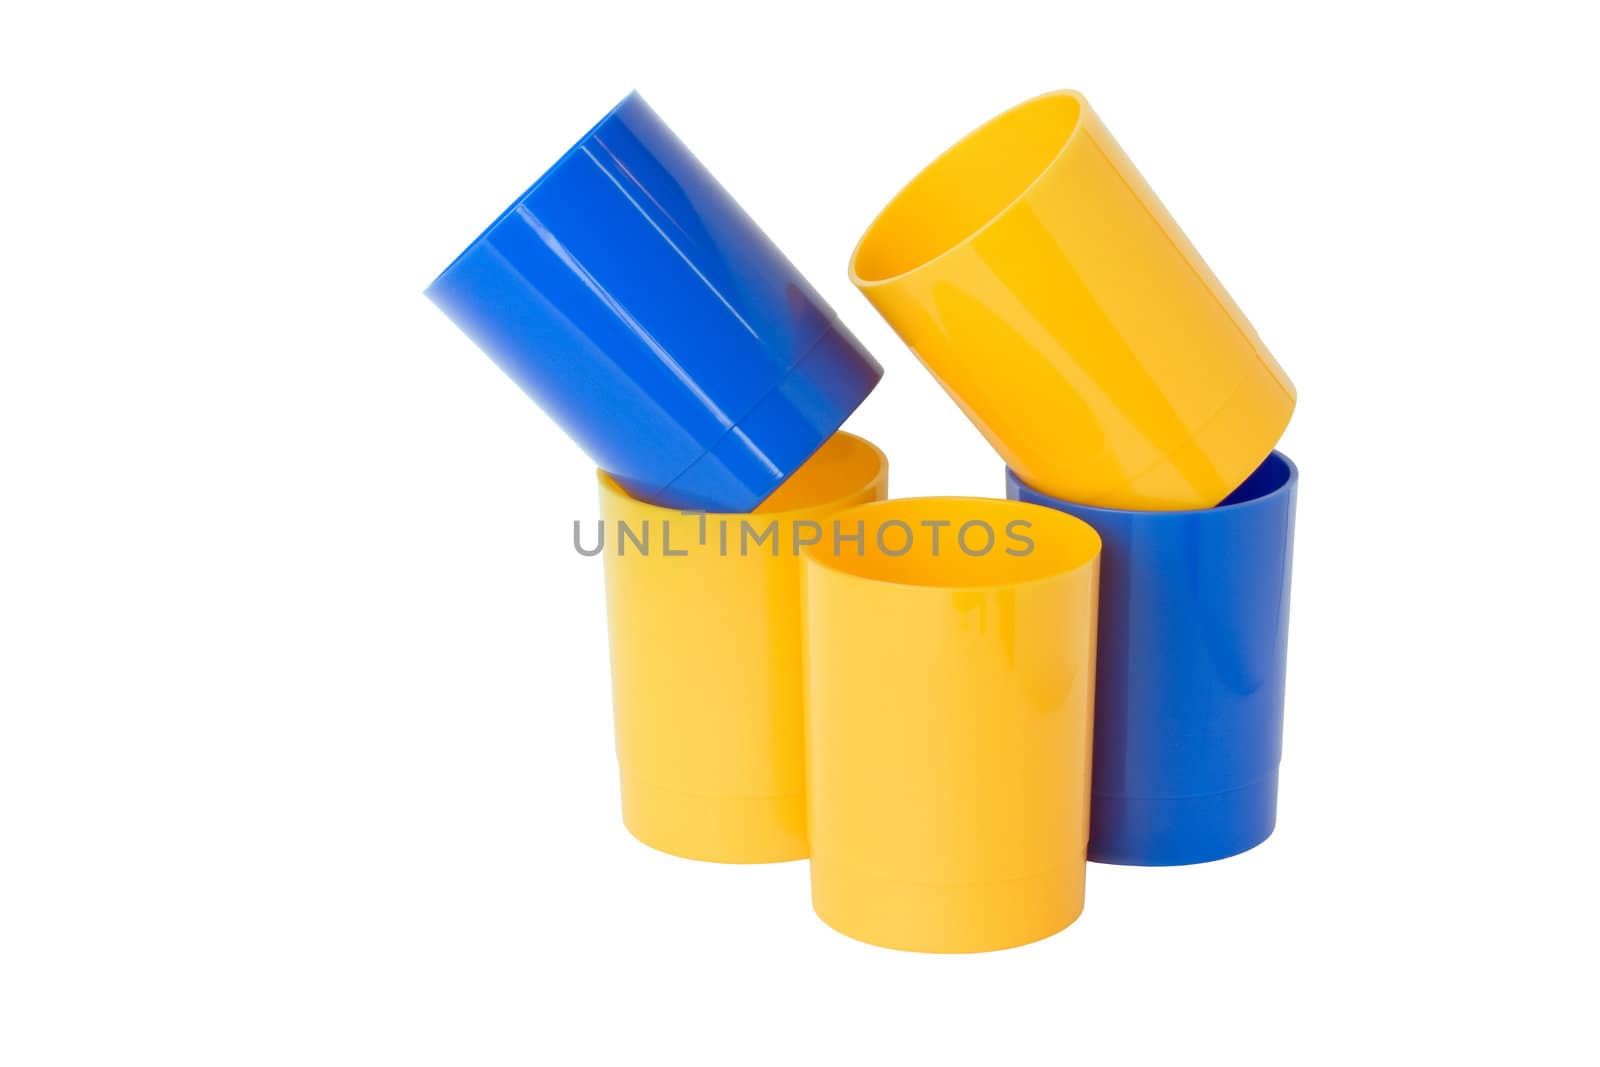 Five colored plastic cups, isolated on a white background.